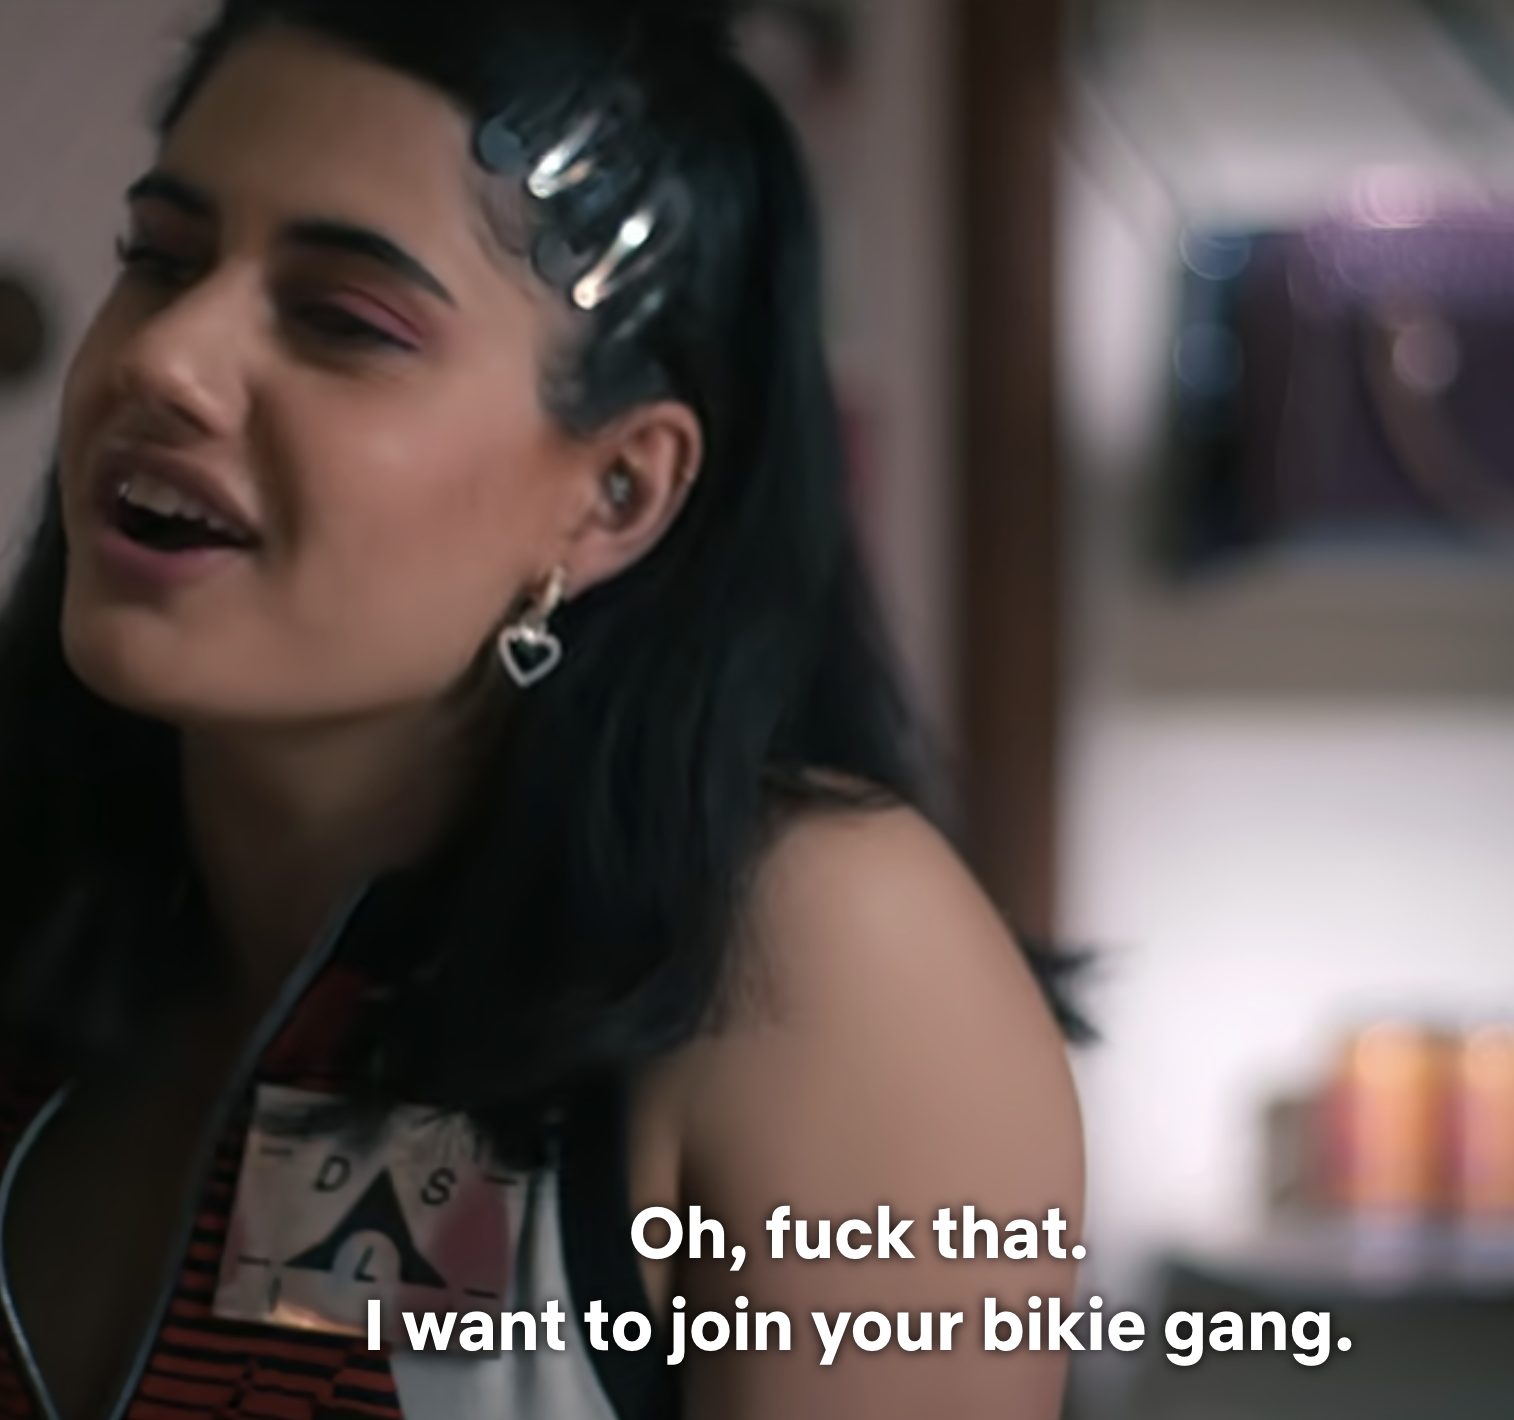 A woman with hair clips smiles and speaks, wearing a striped tank top; subtitle expresses her desire to join a &quot;bikie gang.&quot;